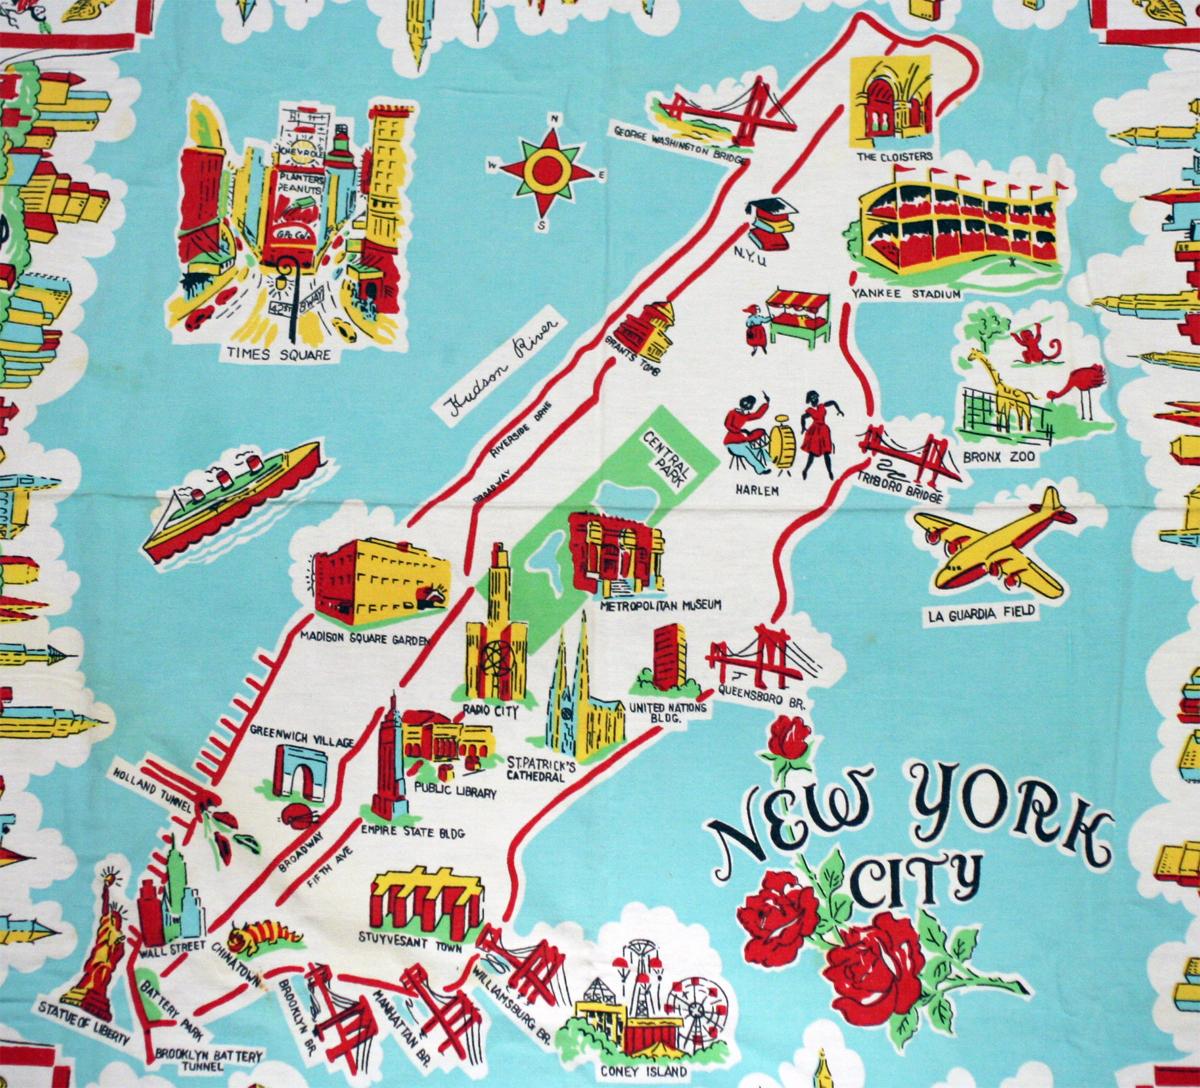 NYC attraction map - Map of New York showing tourist attractions (New